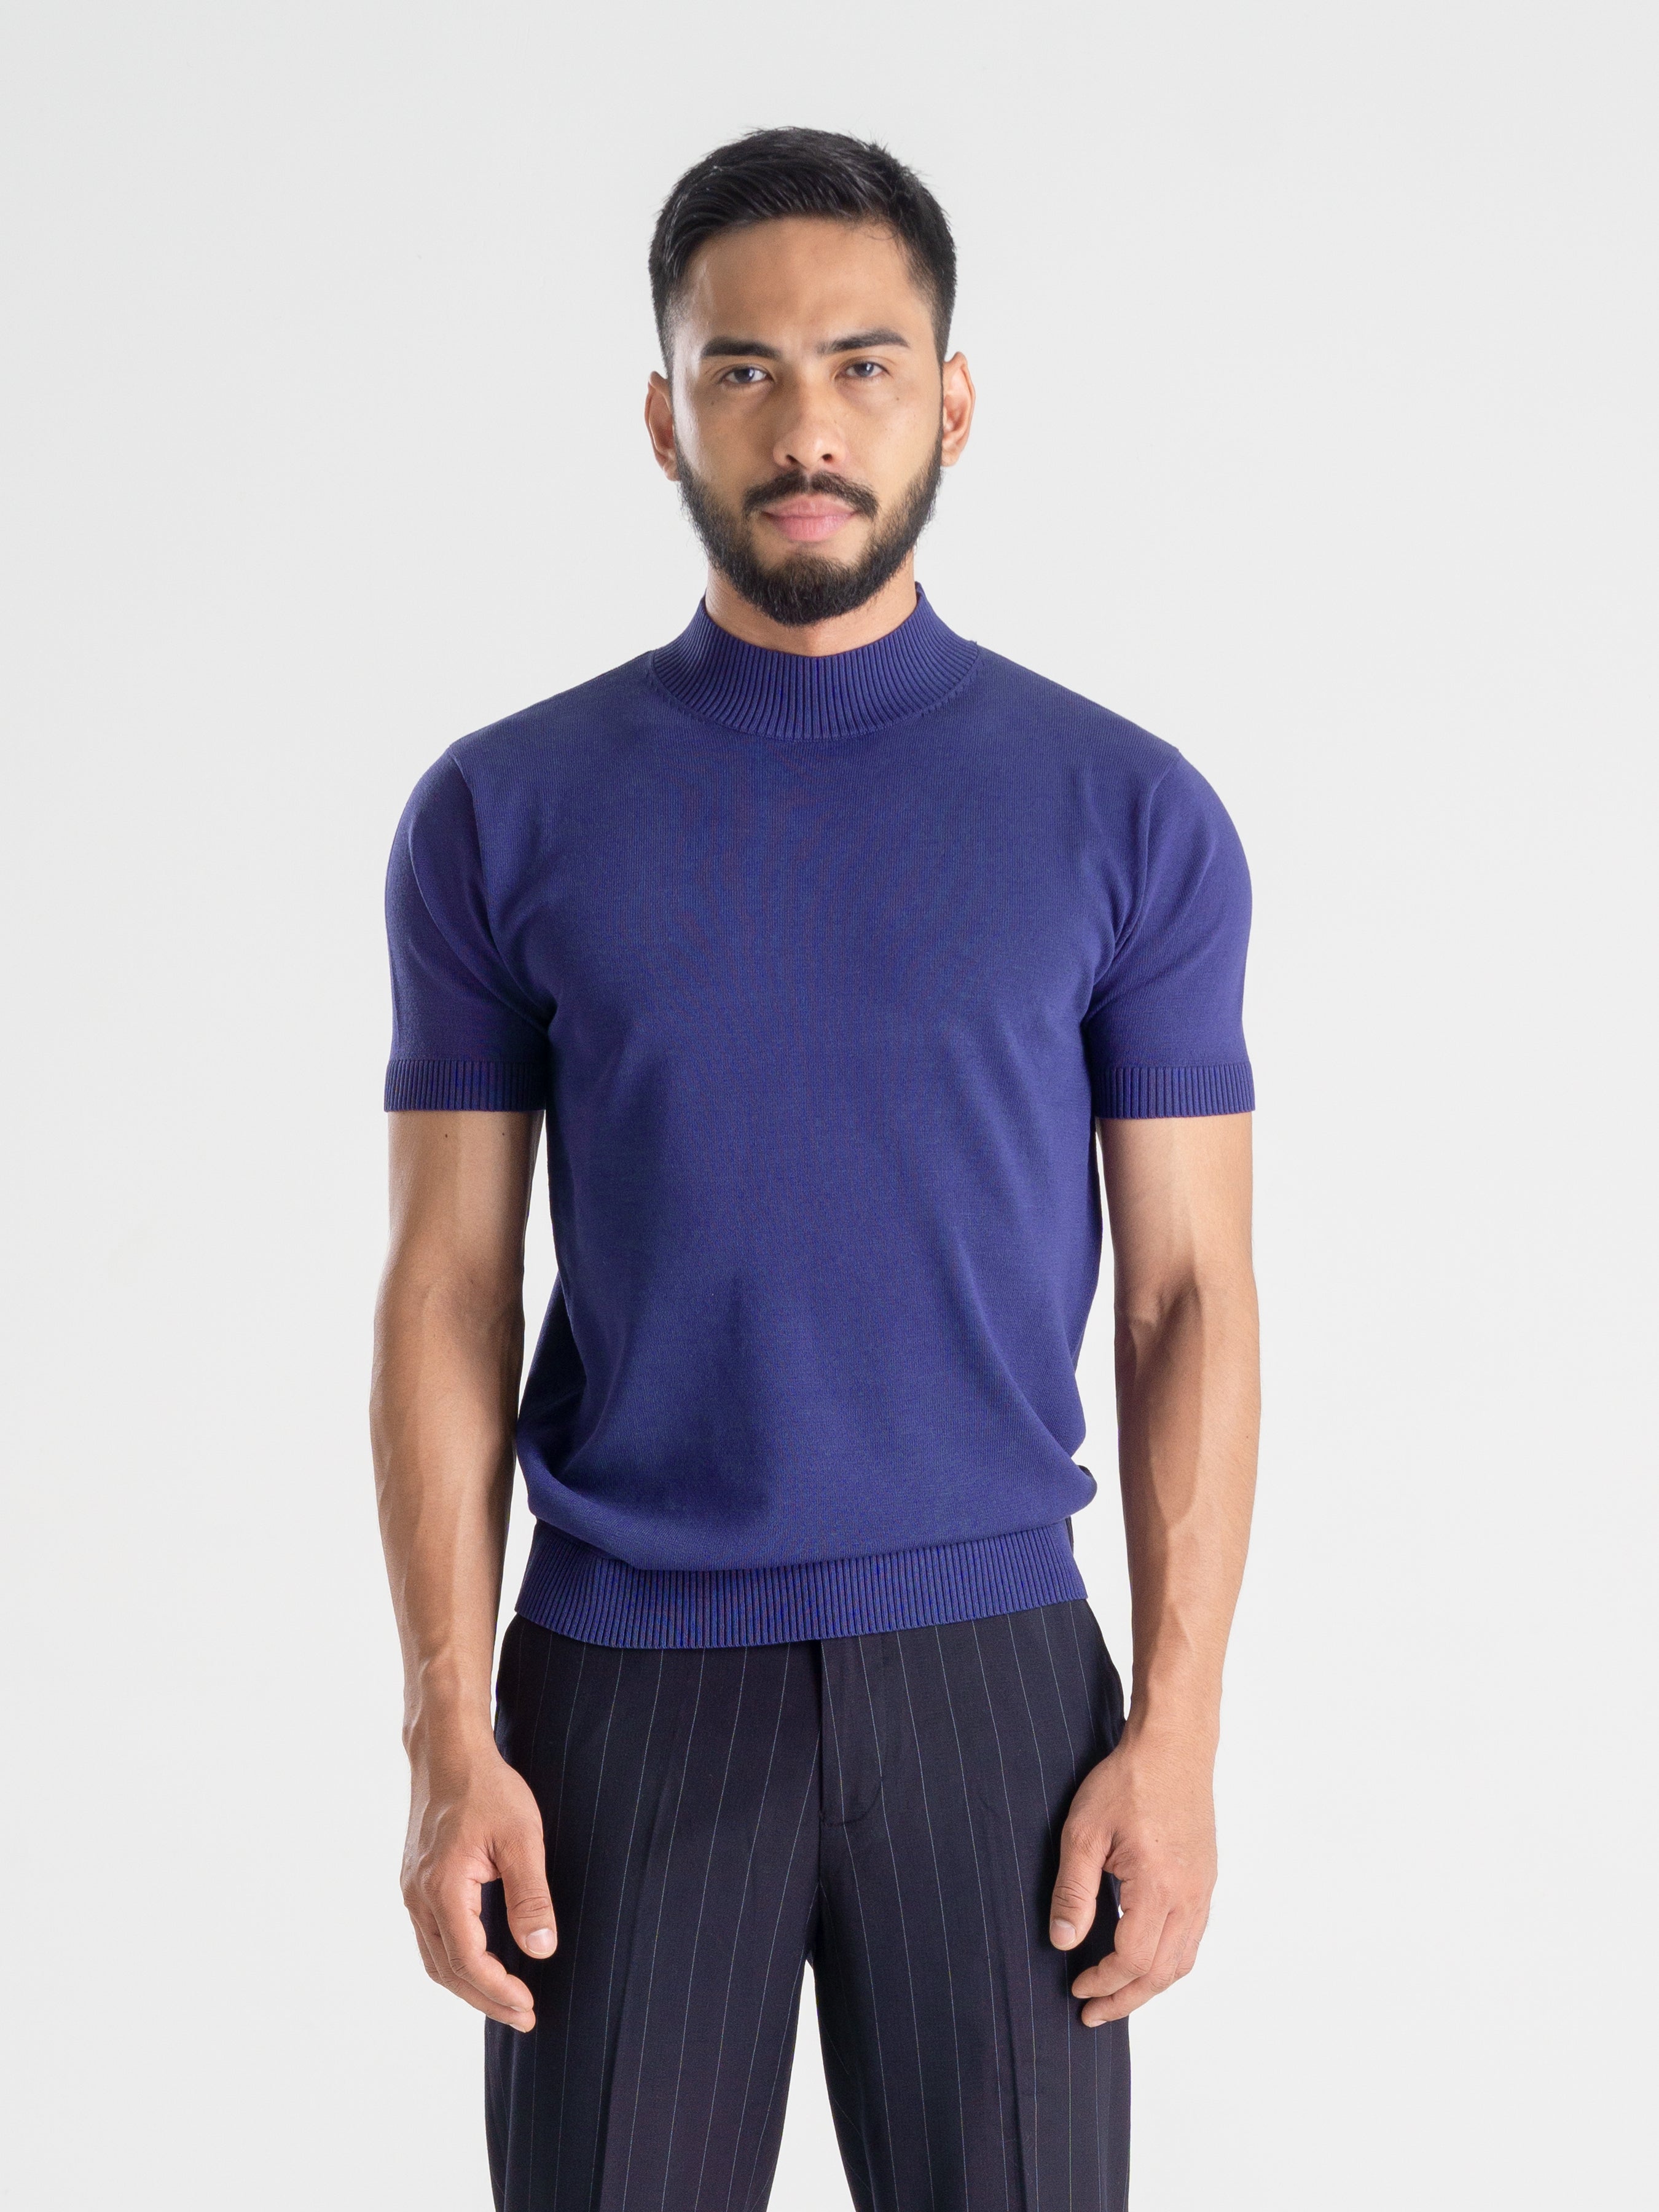 Knit Tee Ribbed Collar - Violet